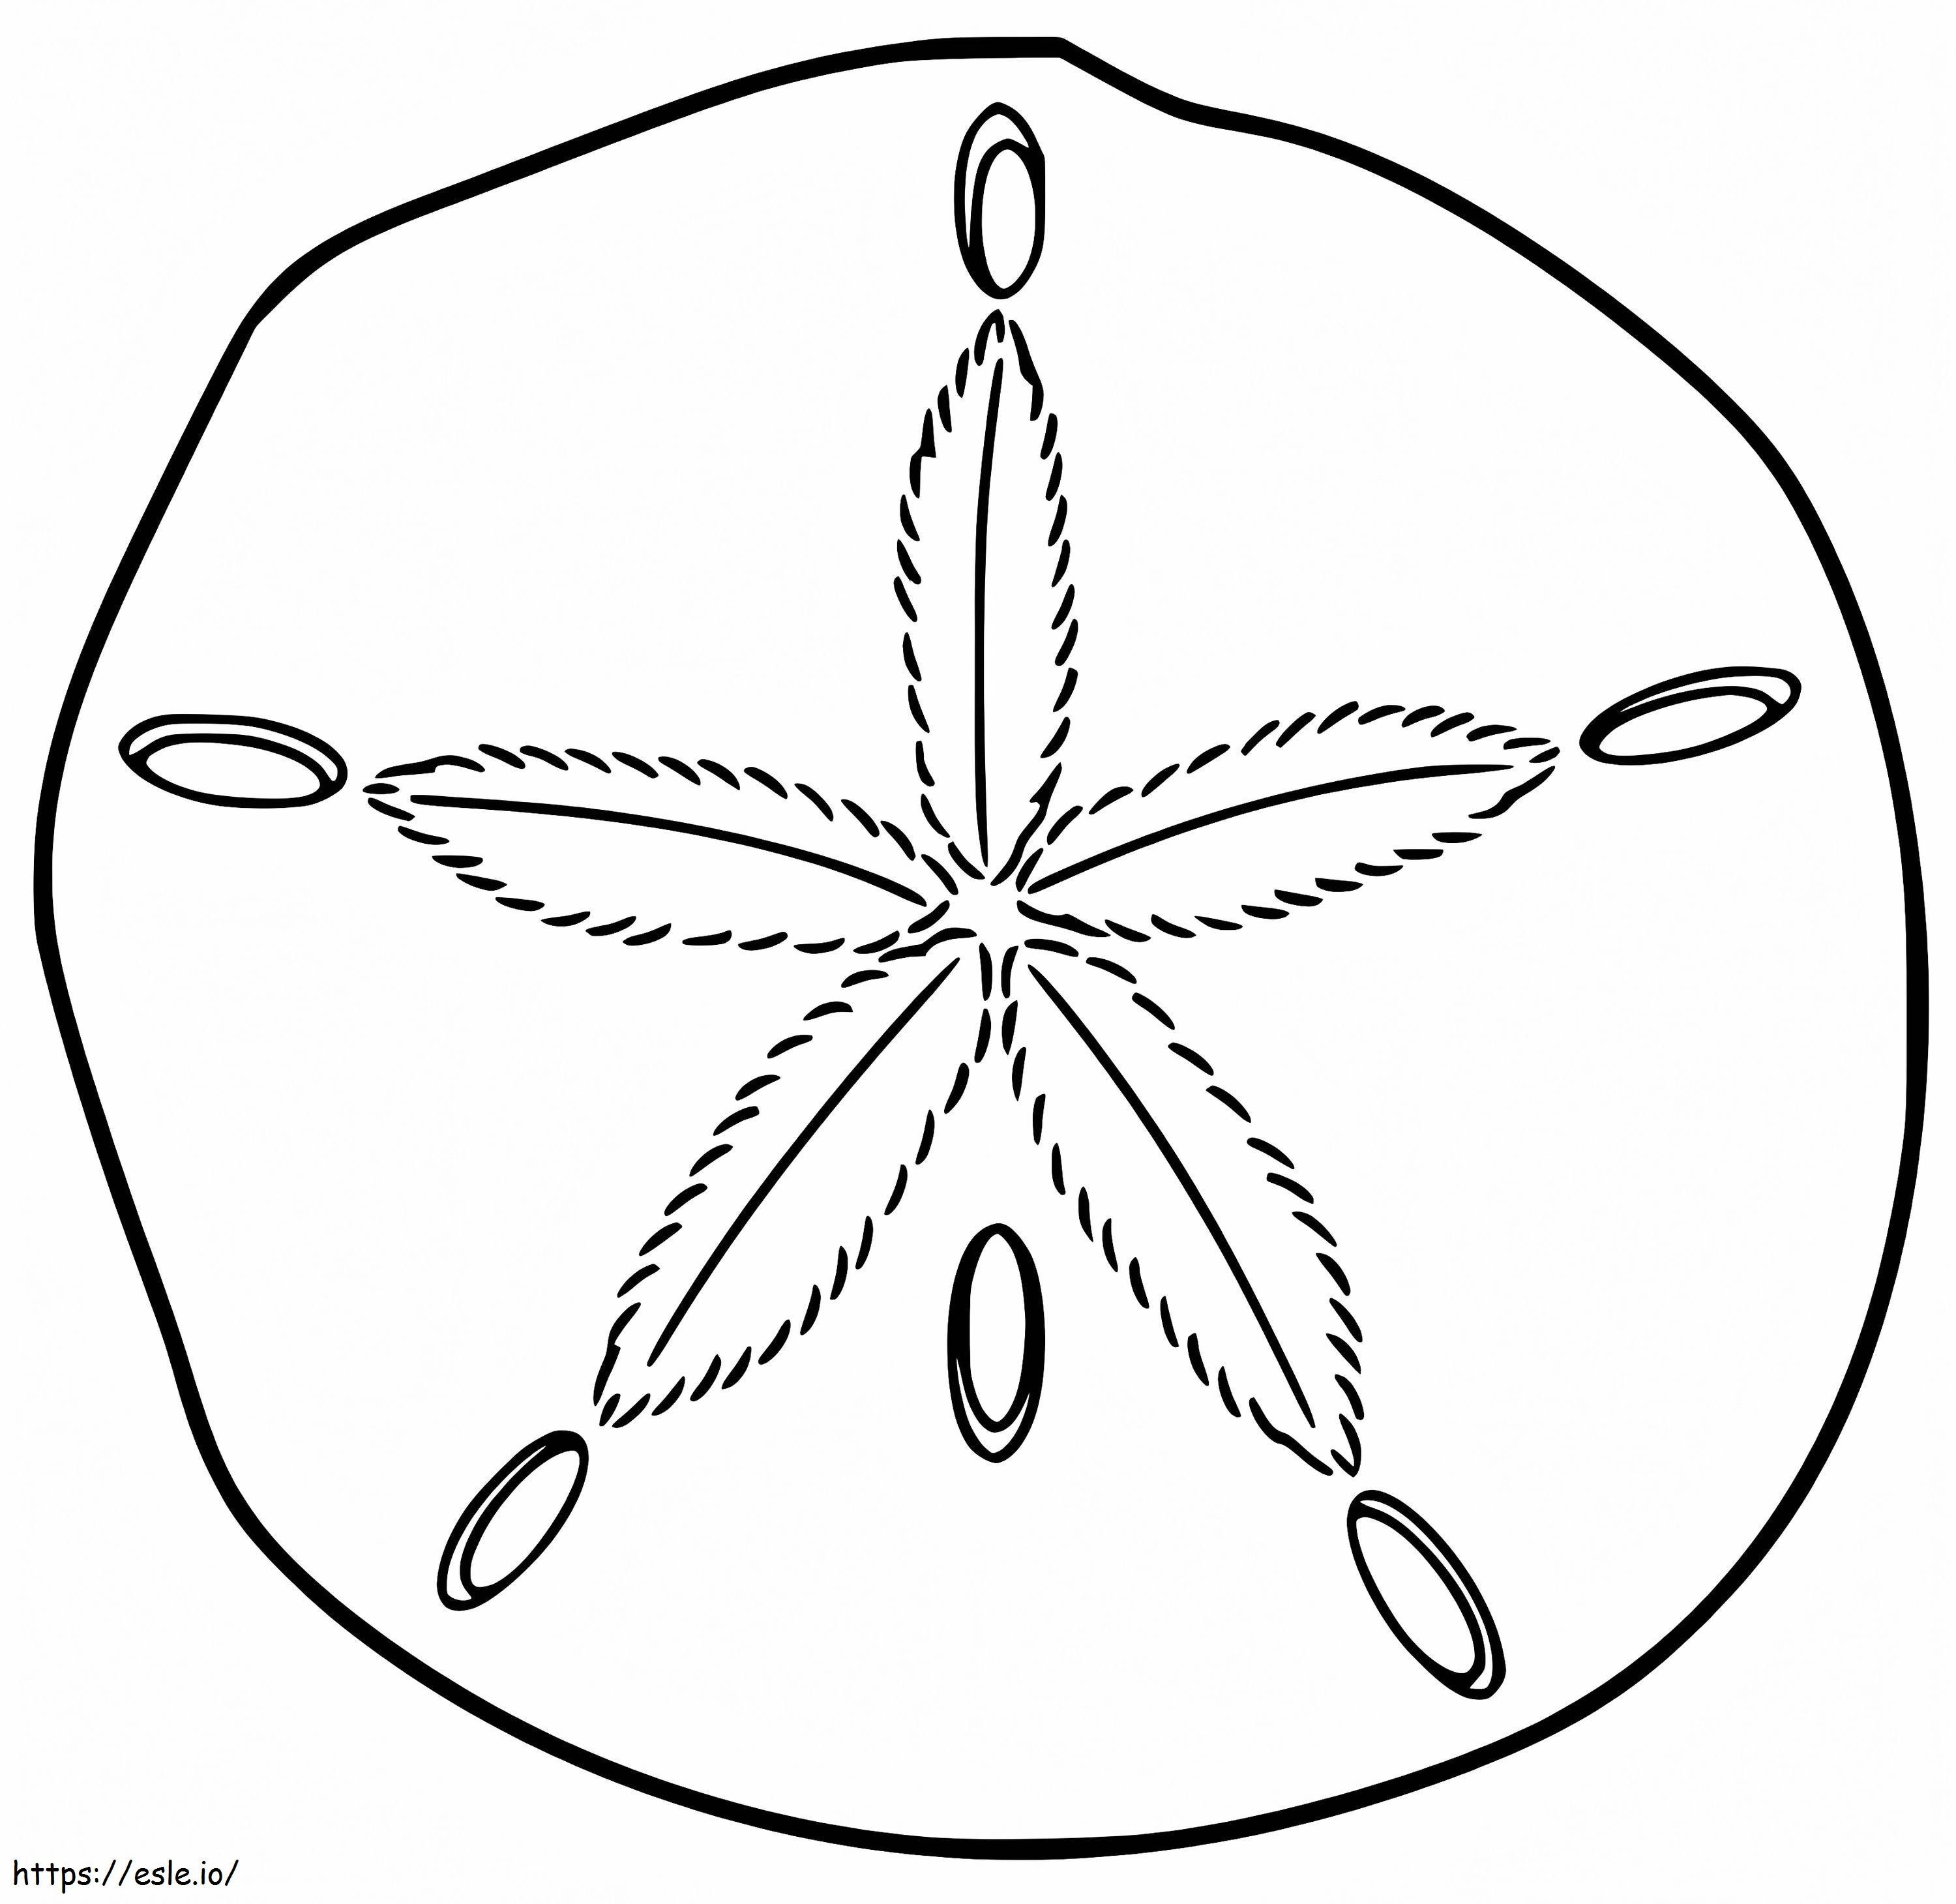 Sand Dollar 8 coloring page